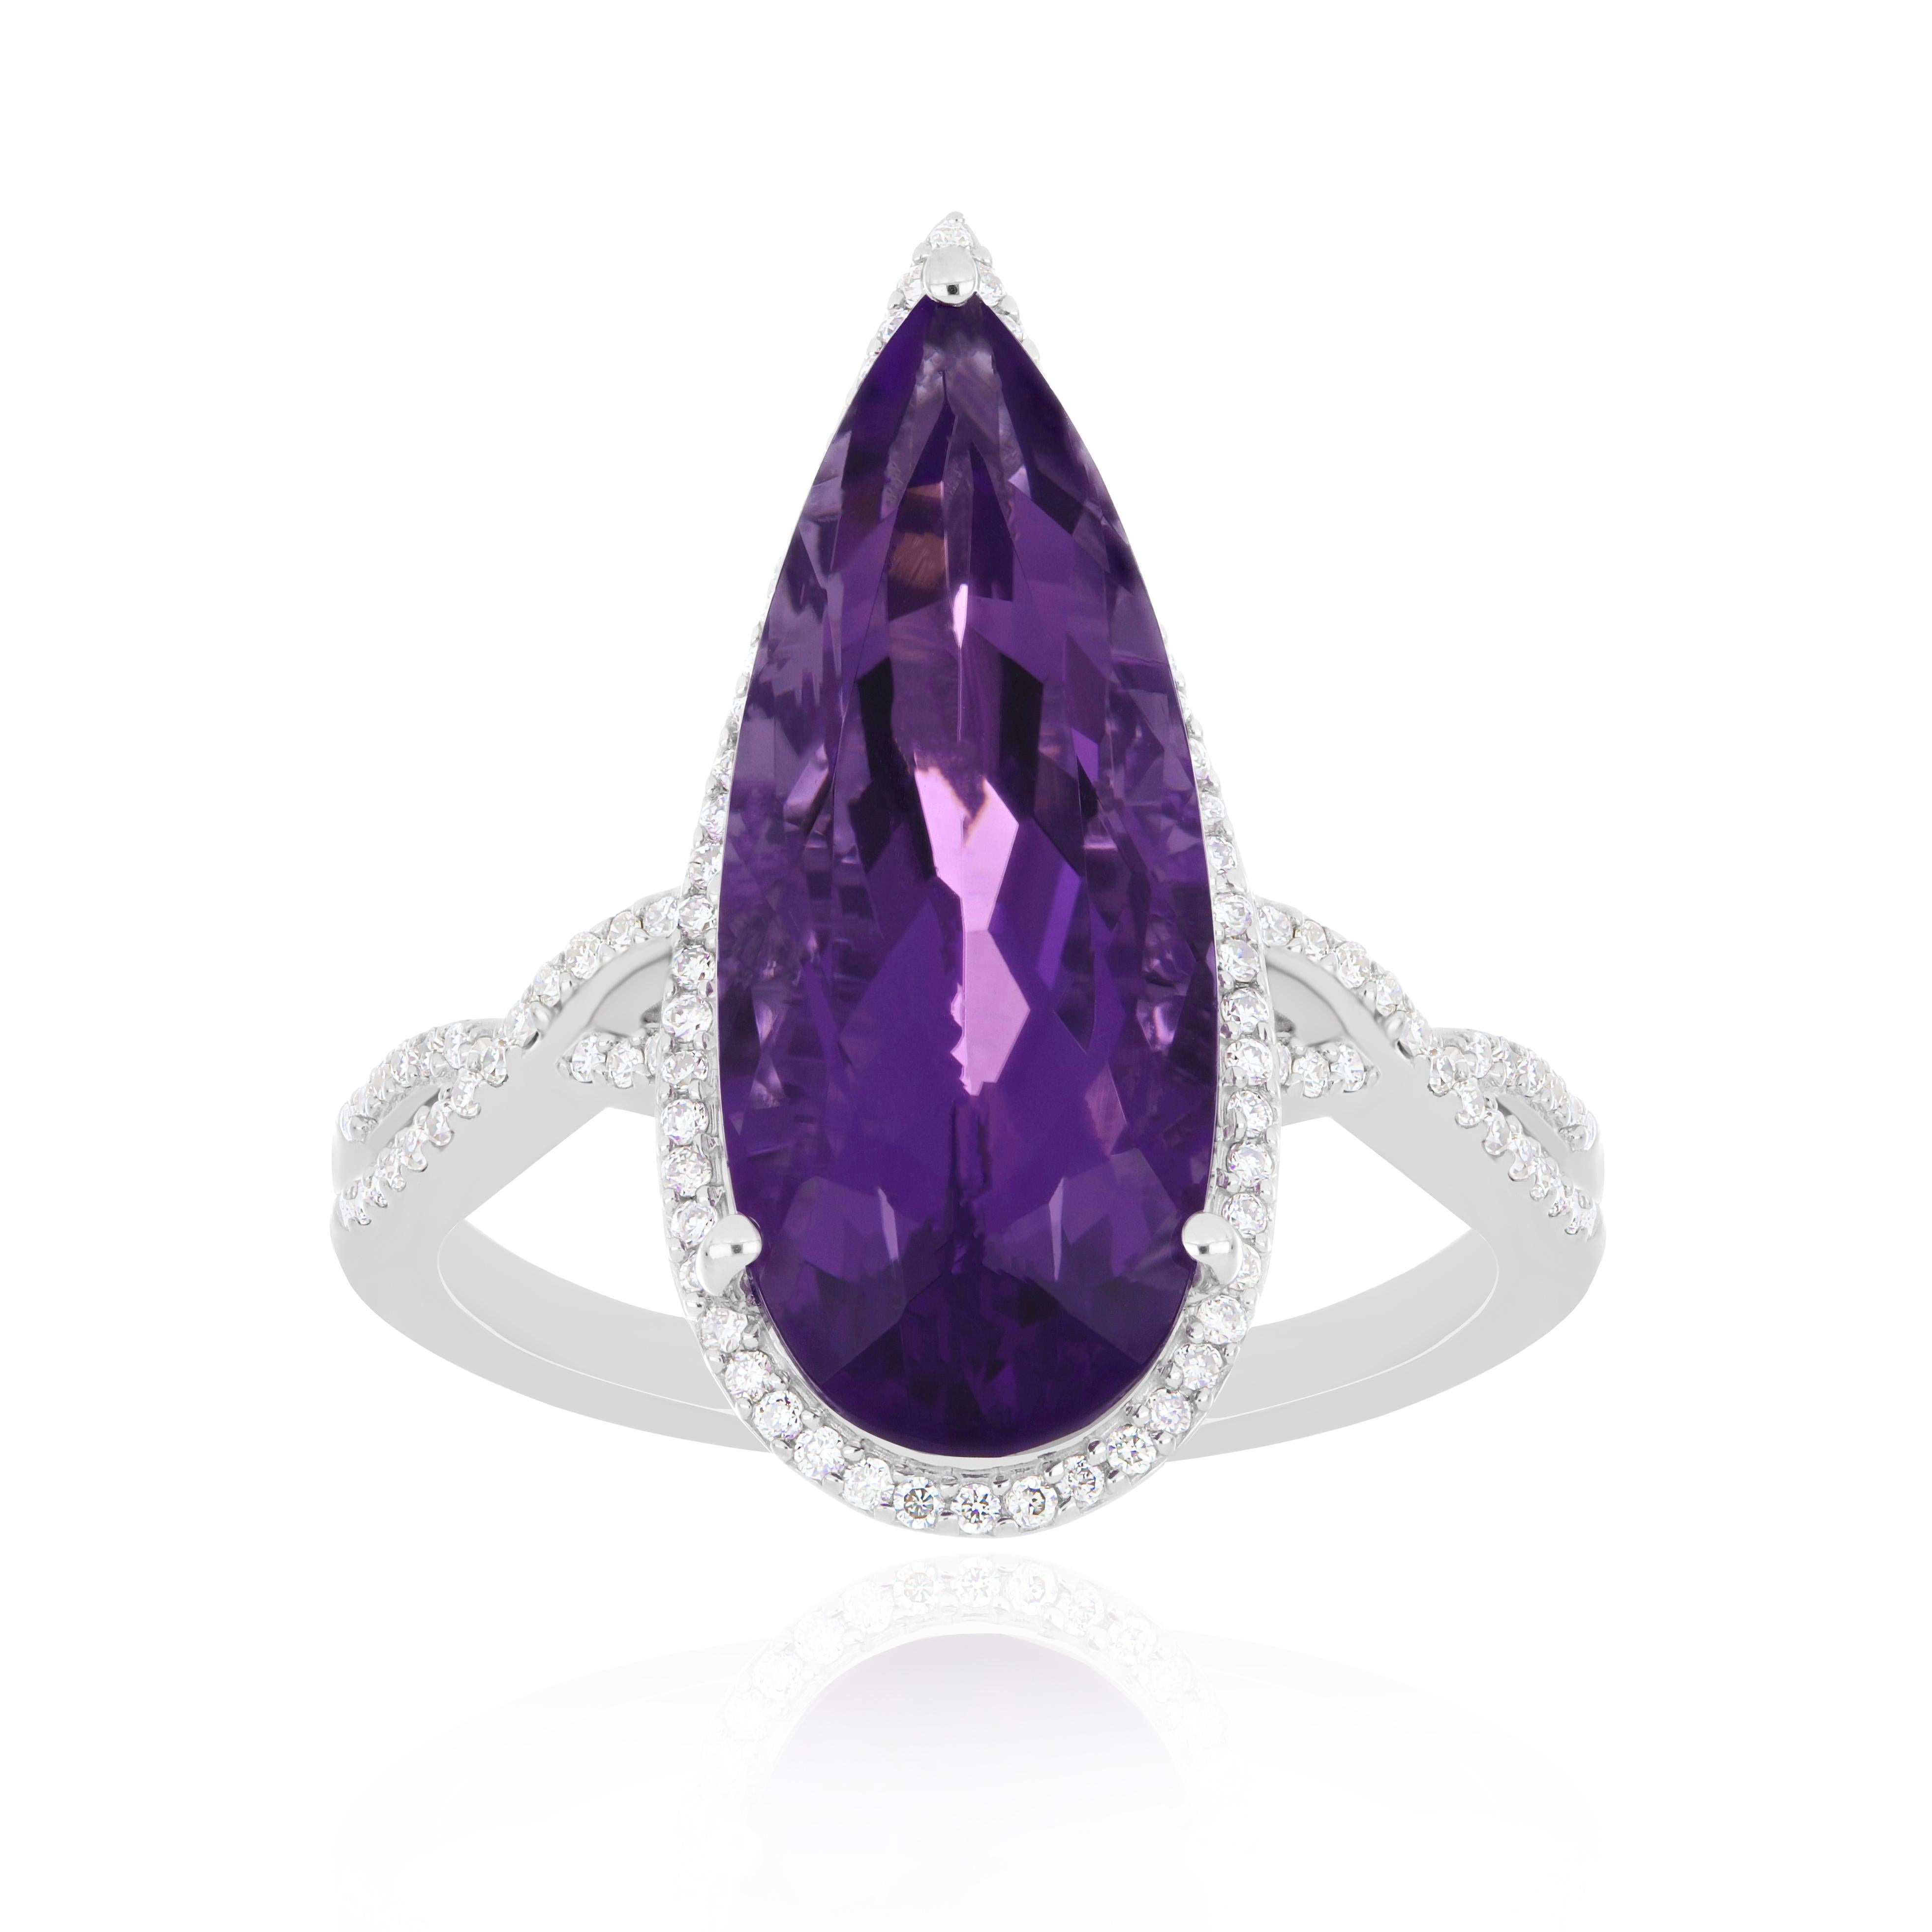 For Sale:  6.11 Carat Amethyst and Diamond Ring in 14 Karat White Gold Ring  2